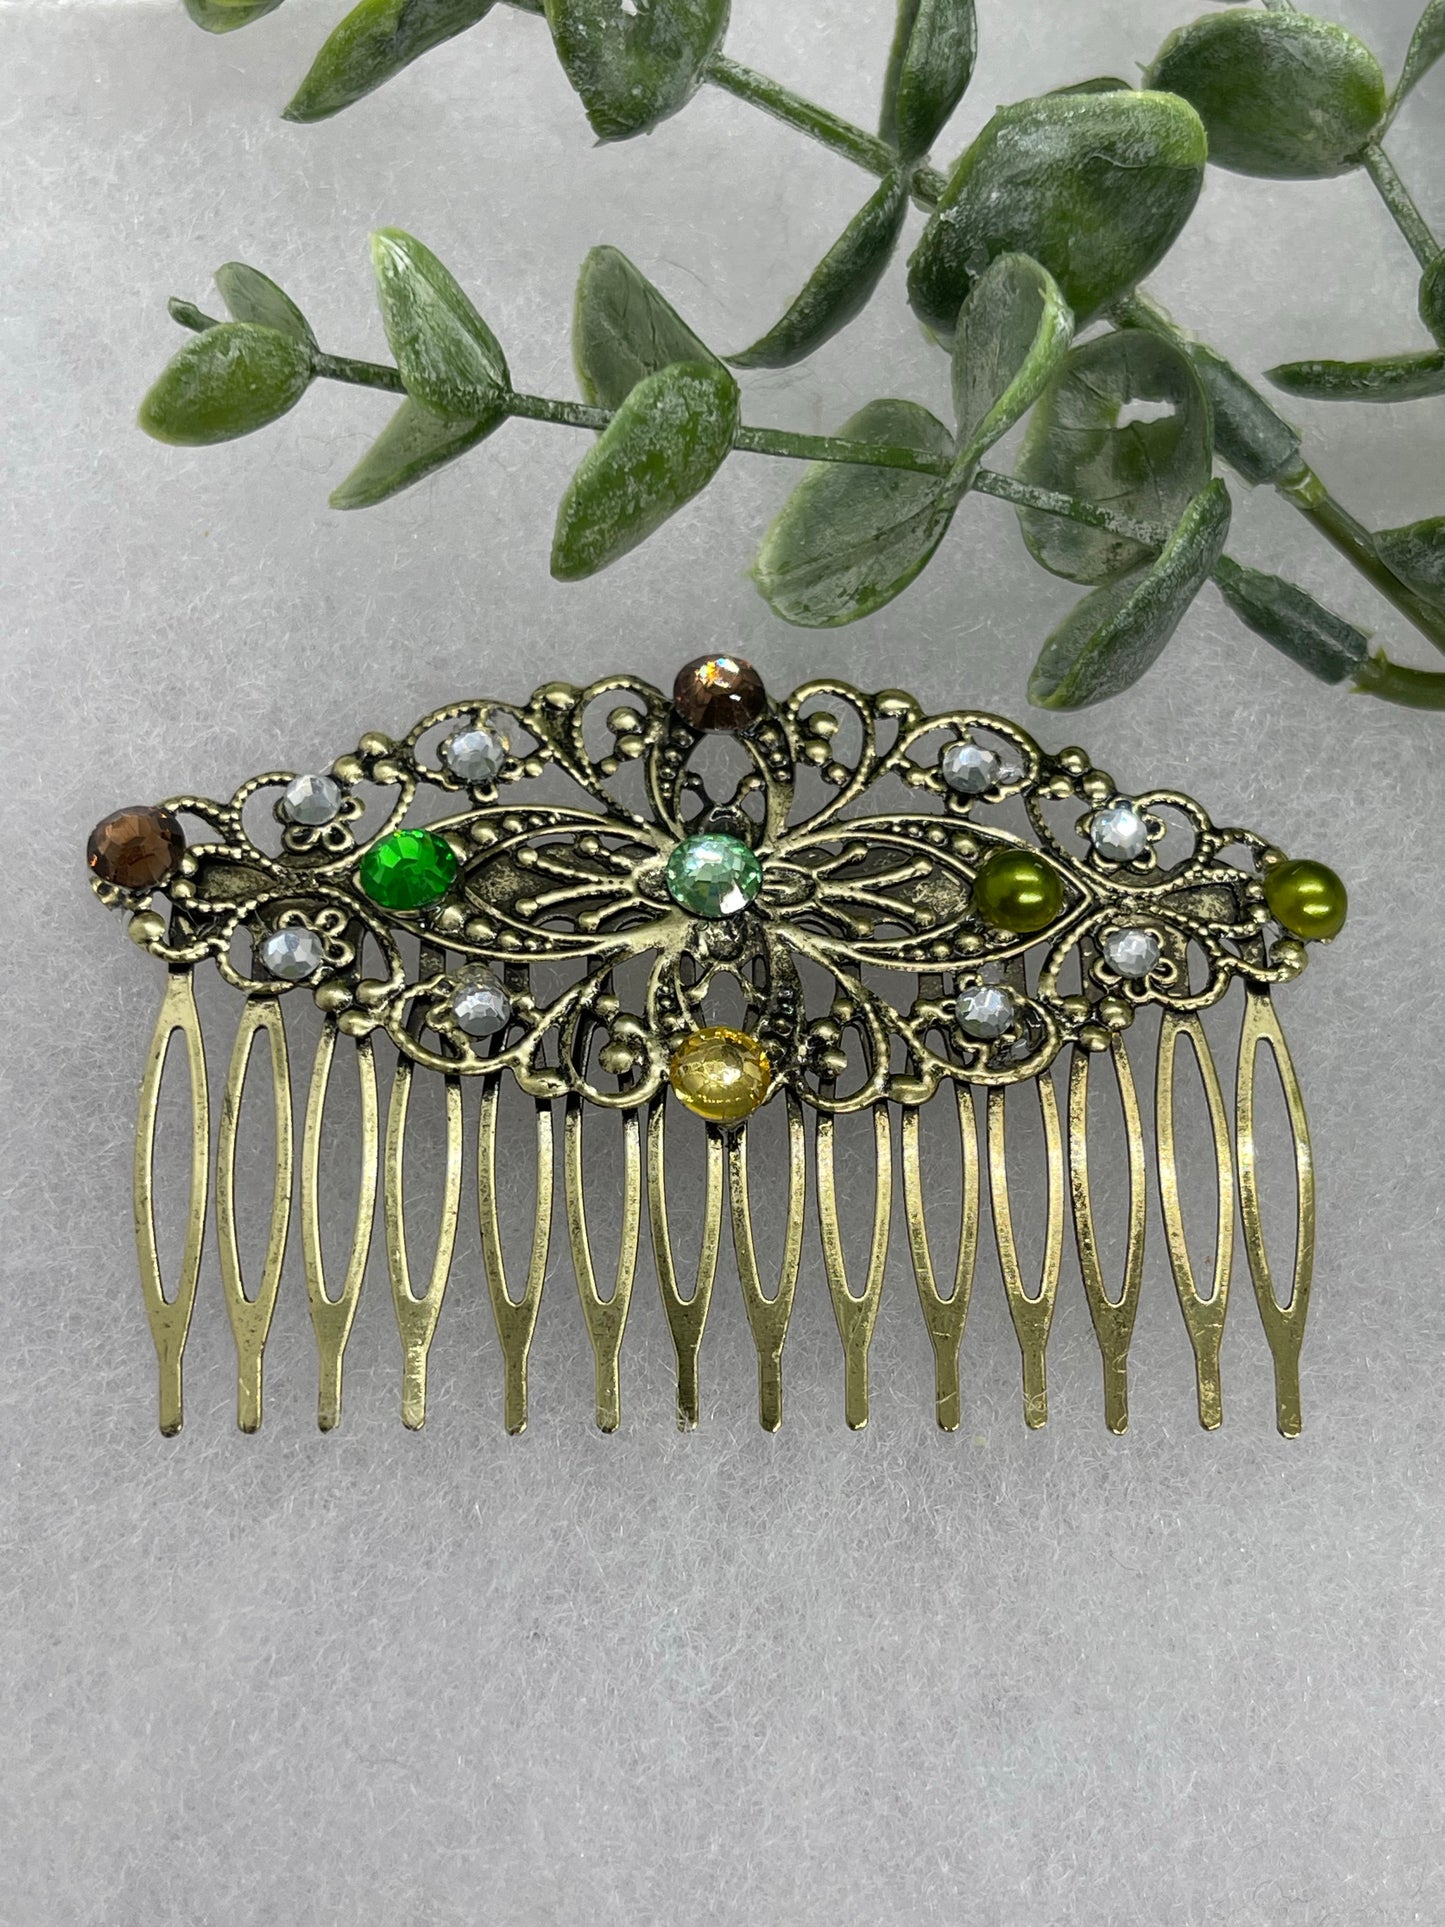 Camouflage crystal faux pearl vintage style tone side comb hair accessory accessories gift birthday event formal bridesmaid wedding   3.5” side comb